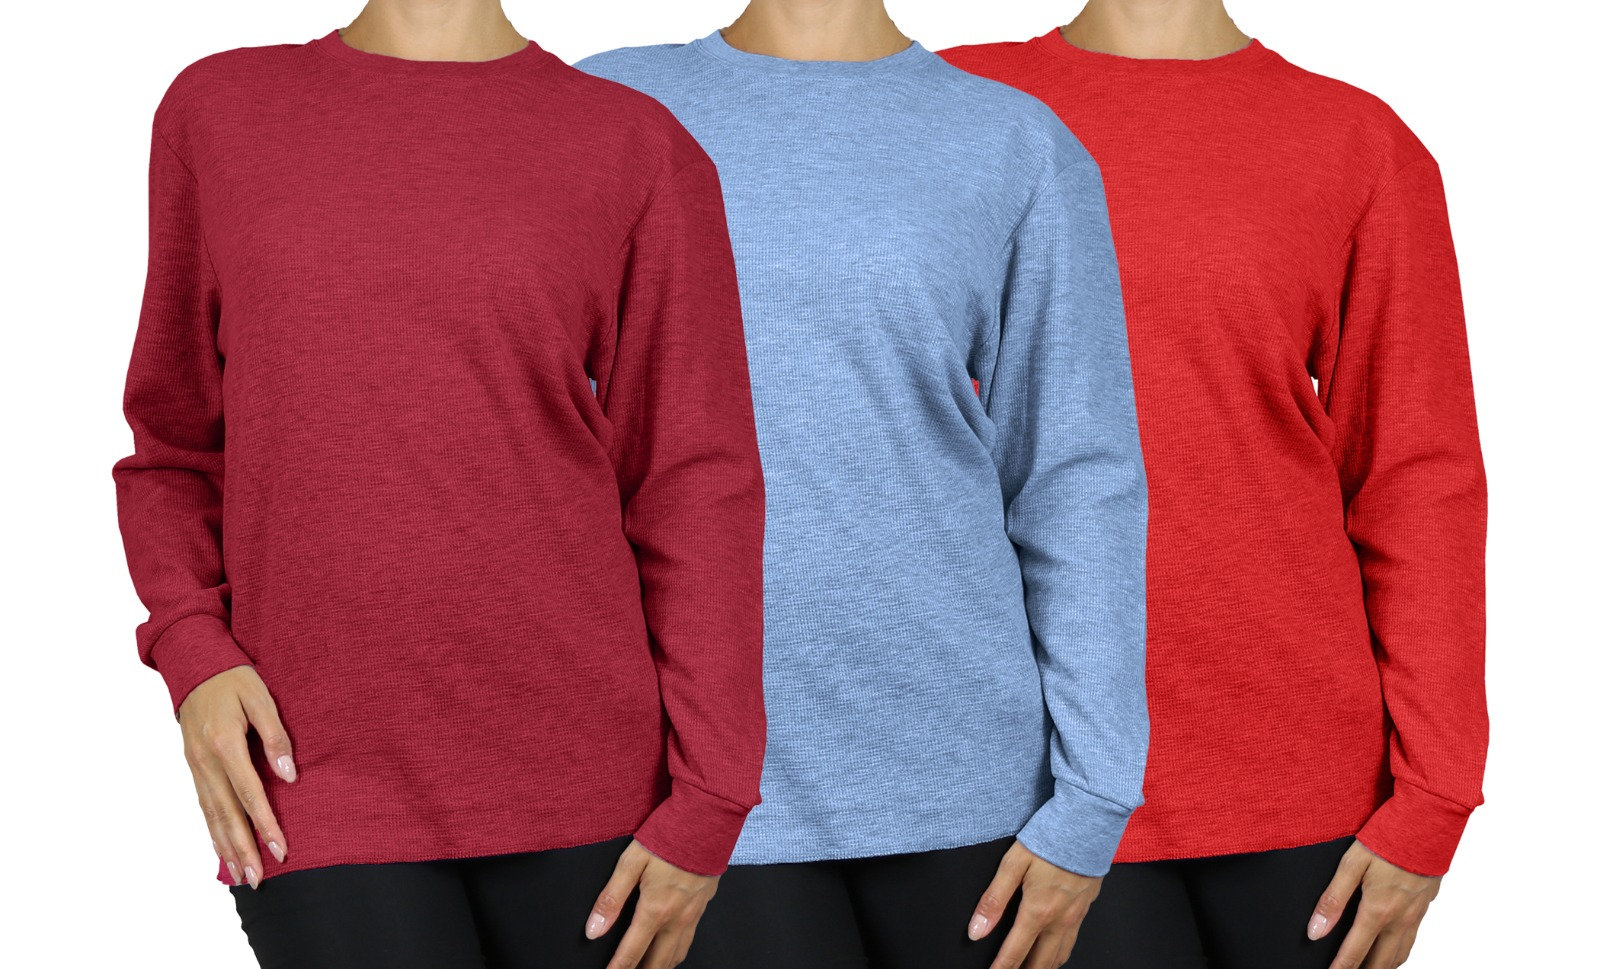 Women's 3-pack Long Sleeve Thermal Shirts 